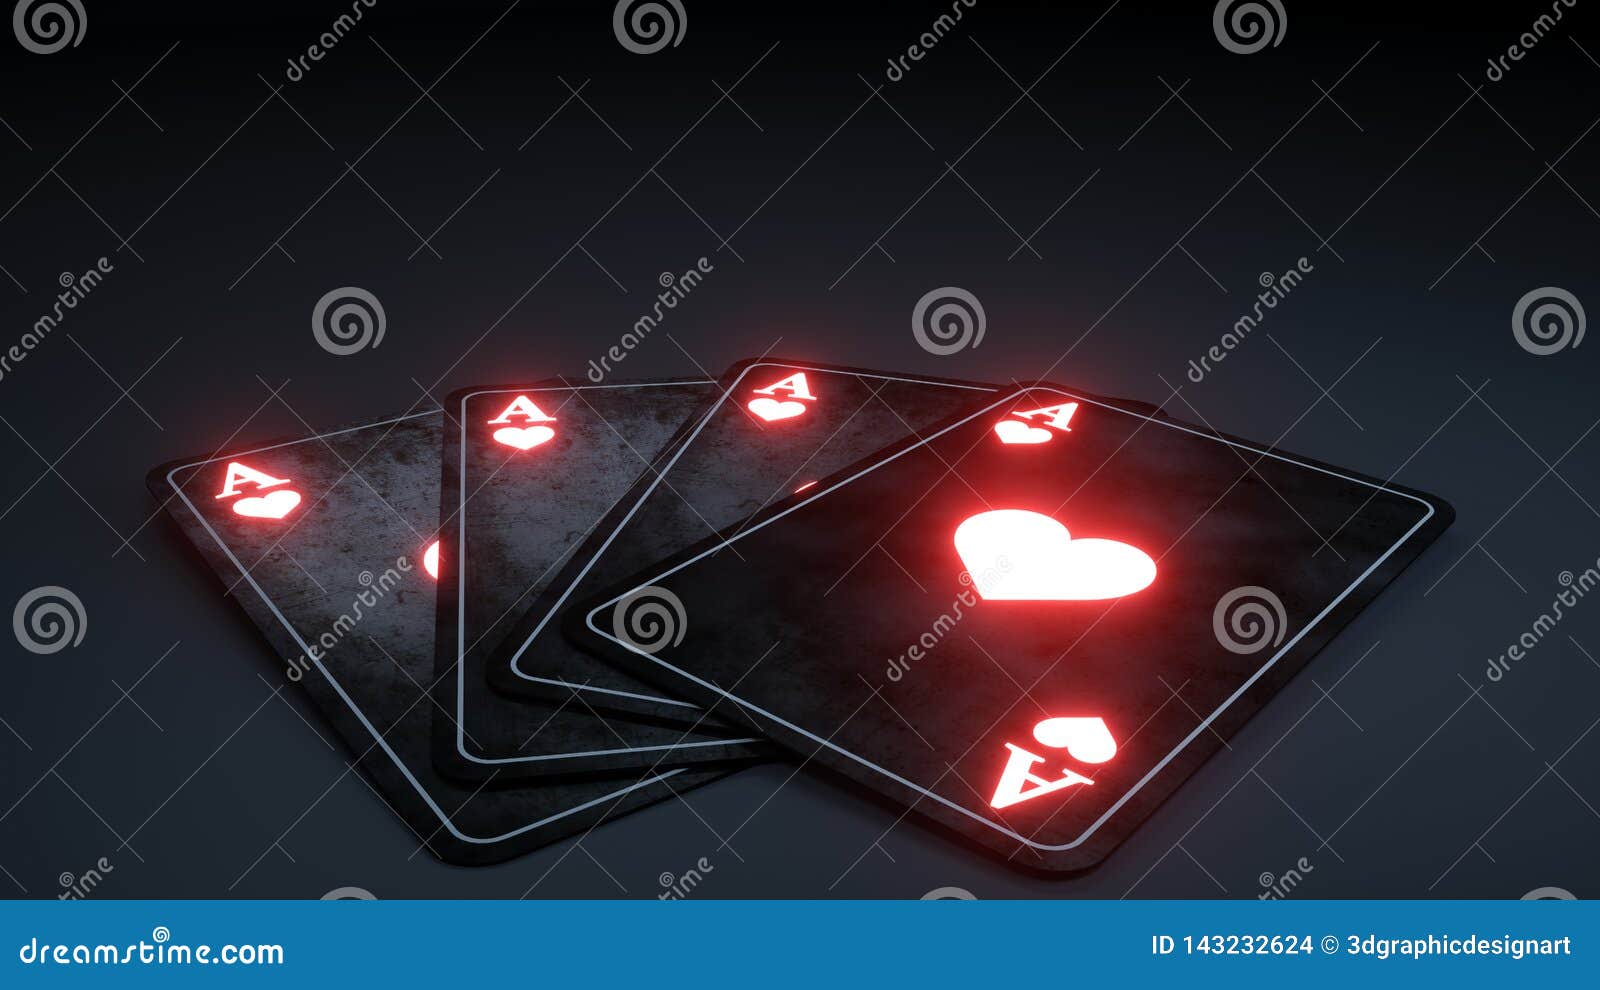 Casino Gambling Poker Cards Concept with Glowing Red Neon Isolated on the  Black Background - 3D Illustration Stock Illustration - Illustration of  jackpot, futuristic: 143232624